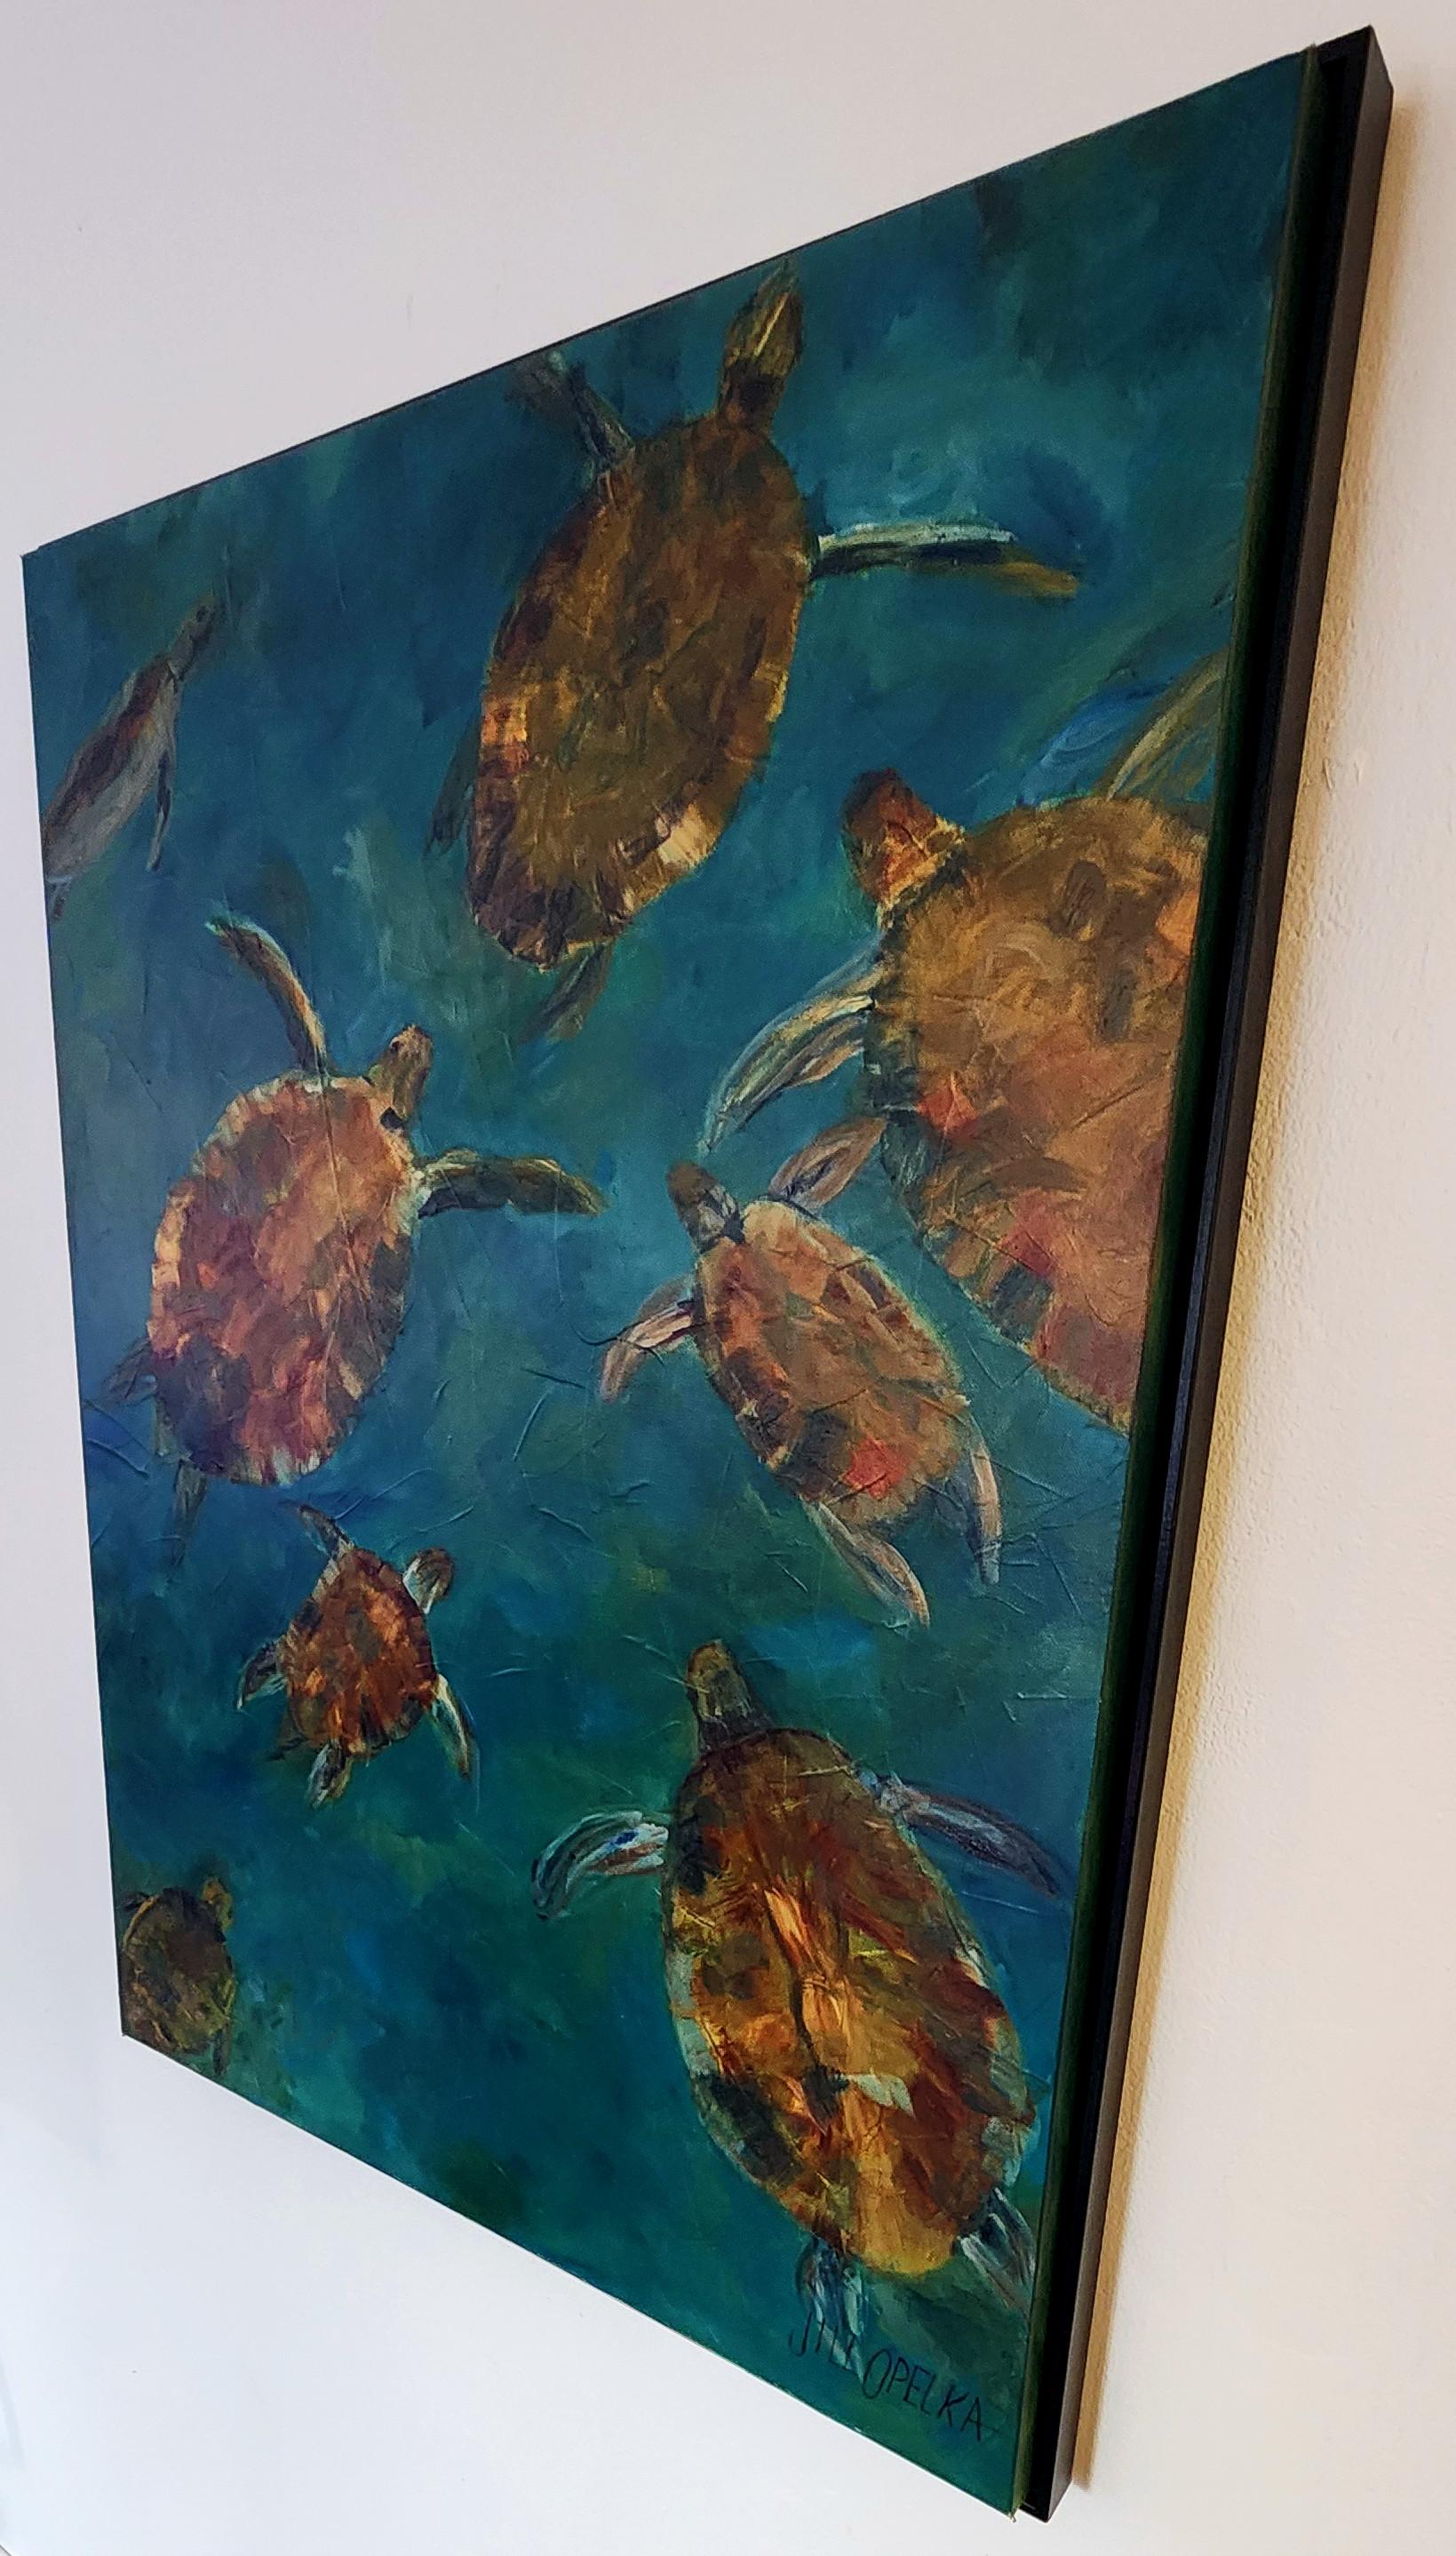 Jill Opelka
Turtles
Oil on Canvas
Year: 2023
Size: 40x30in
Framed: 41x30x1.5in
Signed by hand
COA provided
Ref.: 924802-2051

Tags: Turtles, Teal, Blue, Brown, Deep, Vibrant

*Framed in a black wooden frame


-----------------



Upon entering Jill